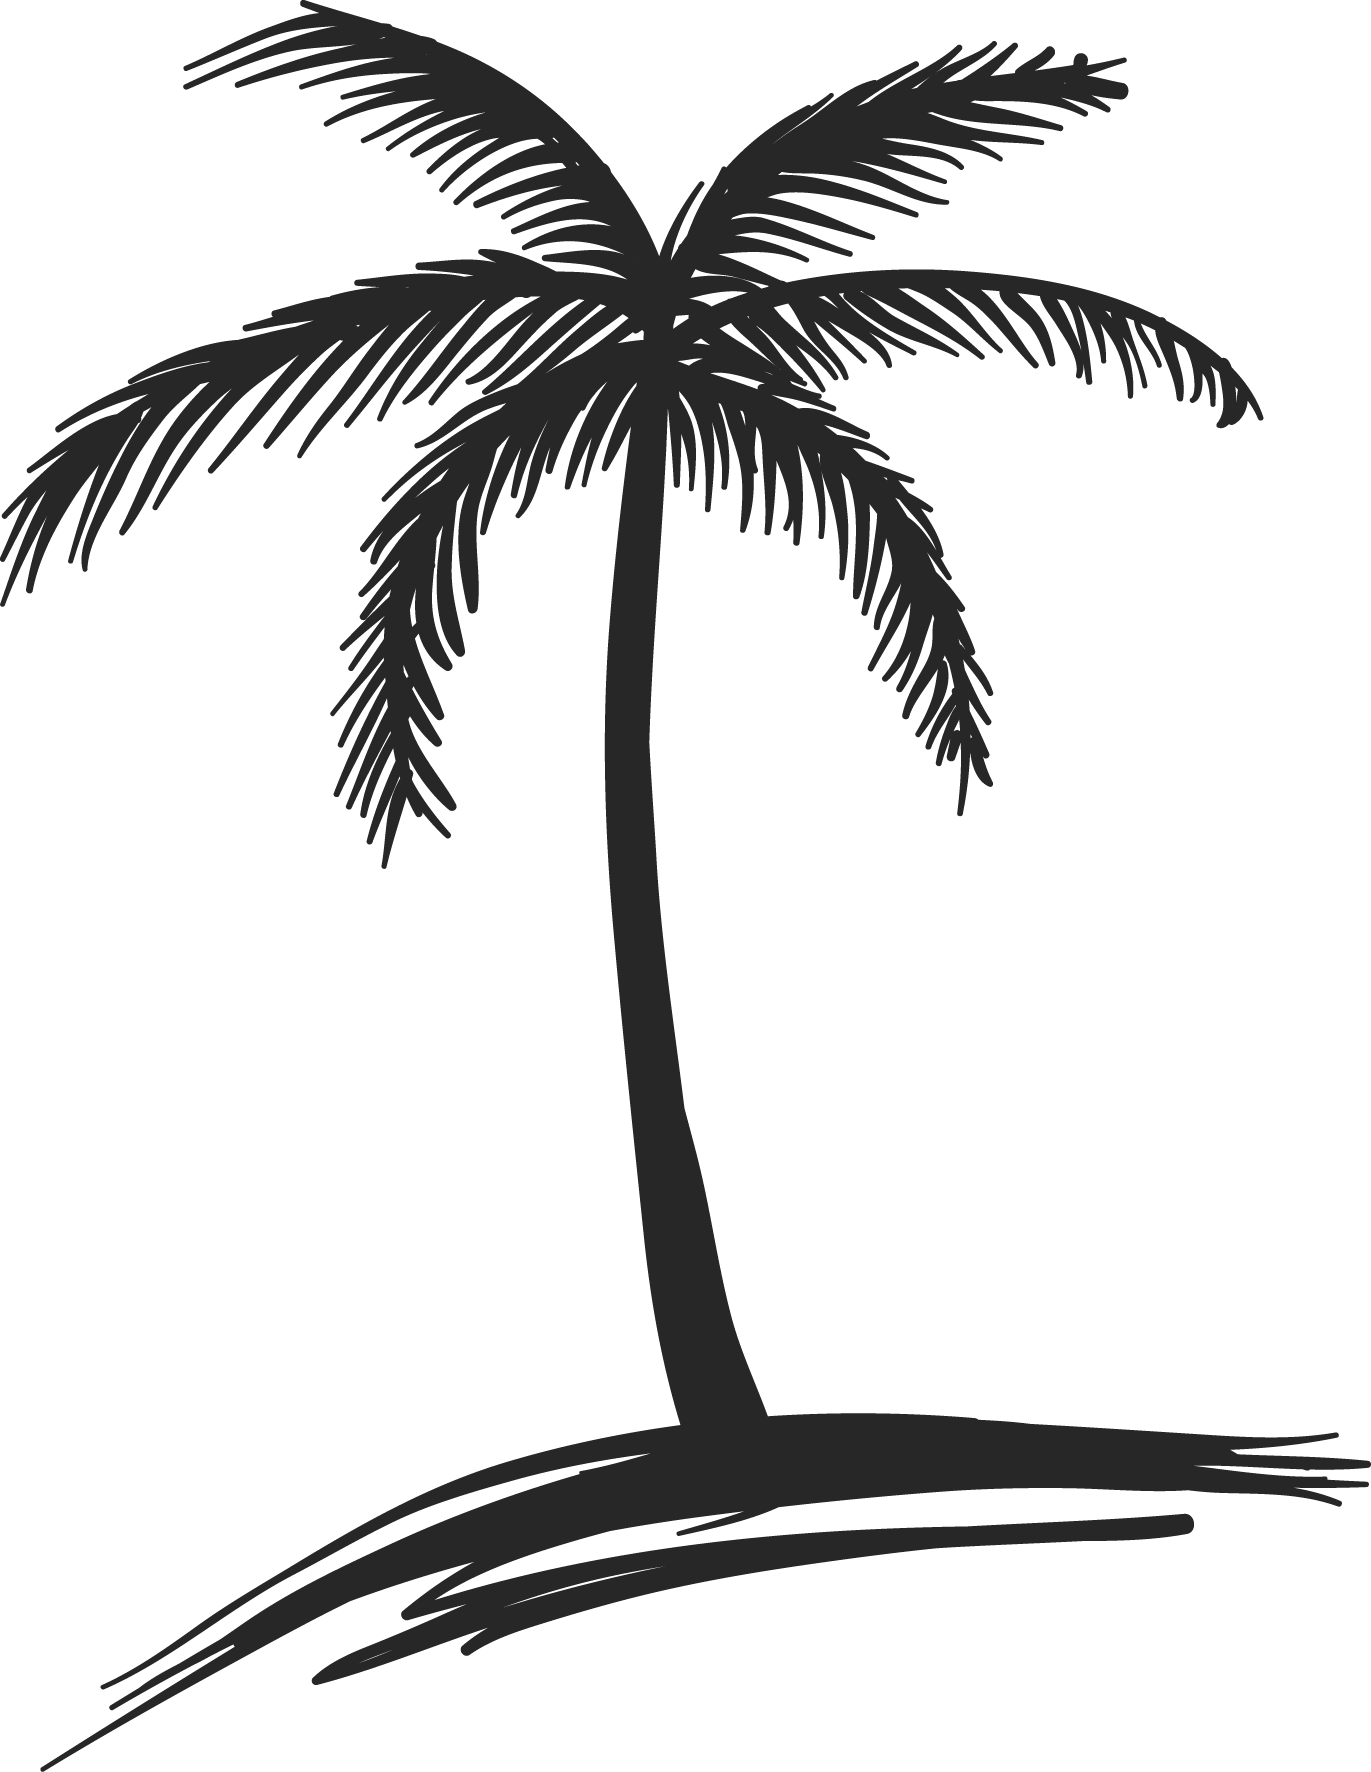 Learn how to draw a Coconut Palm Tree